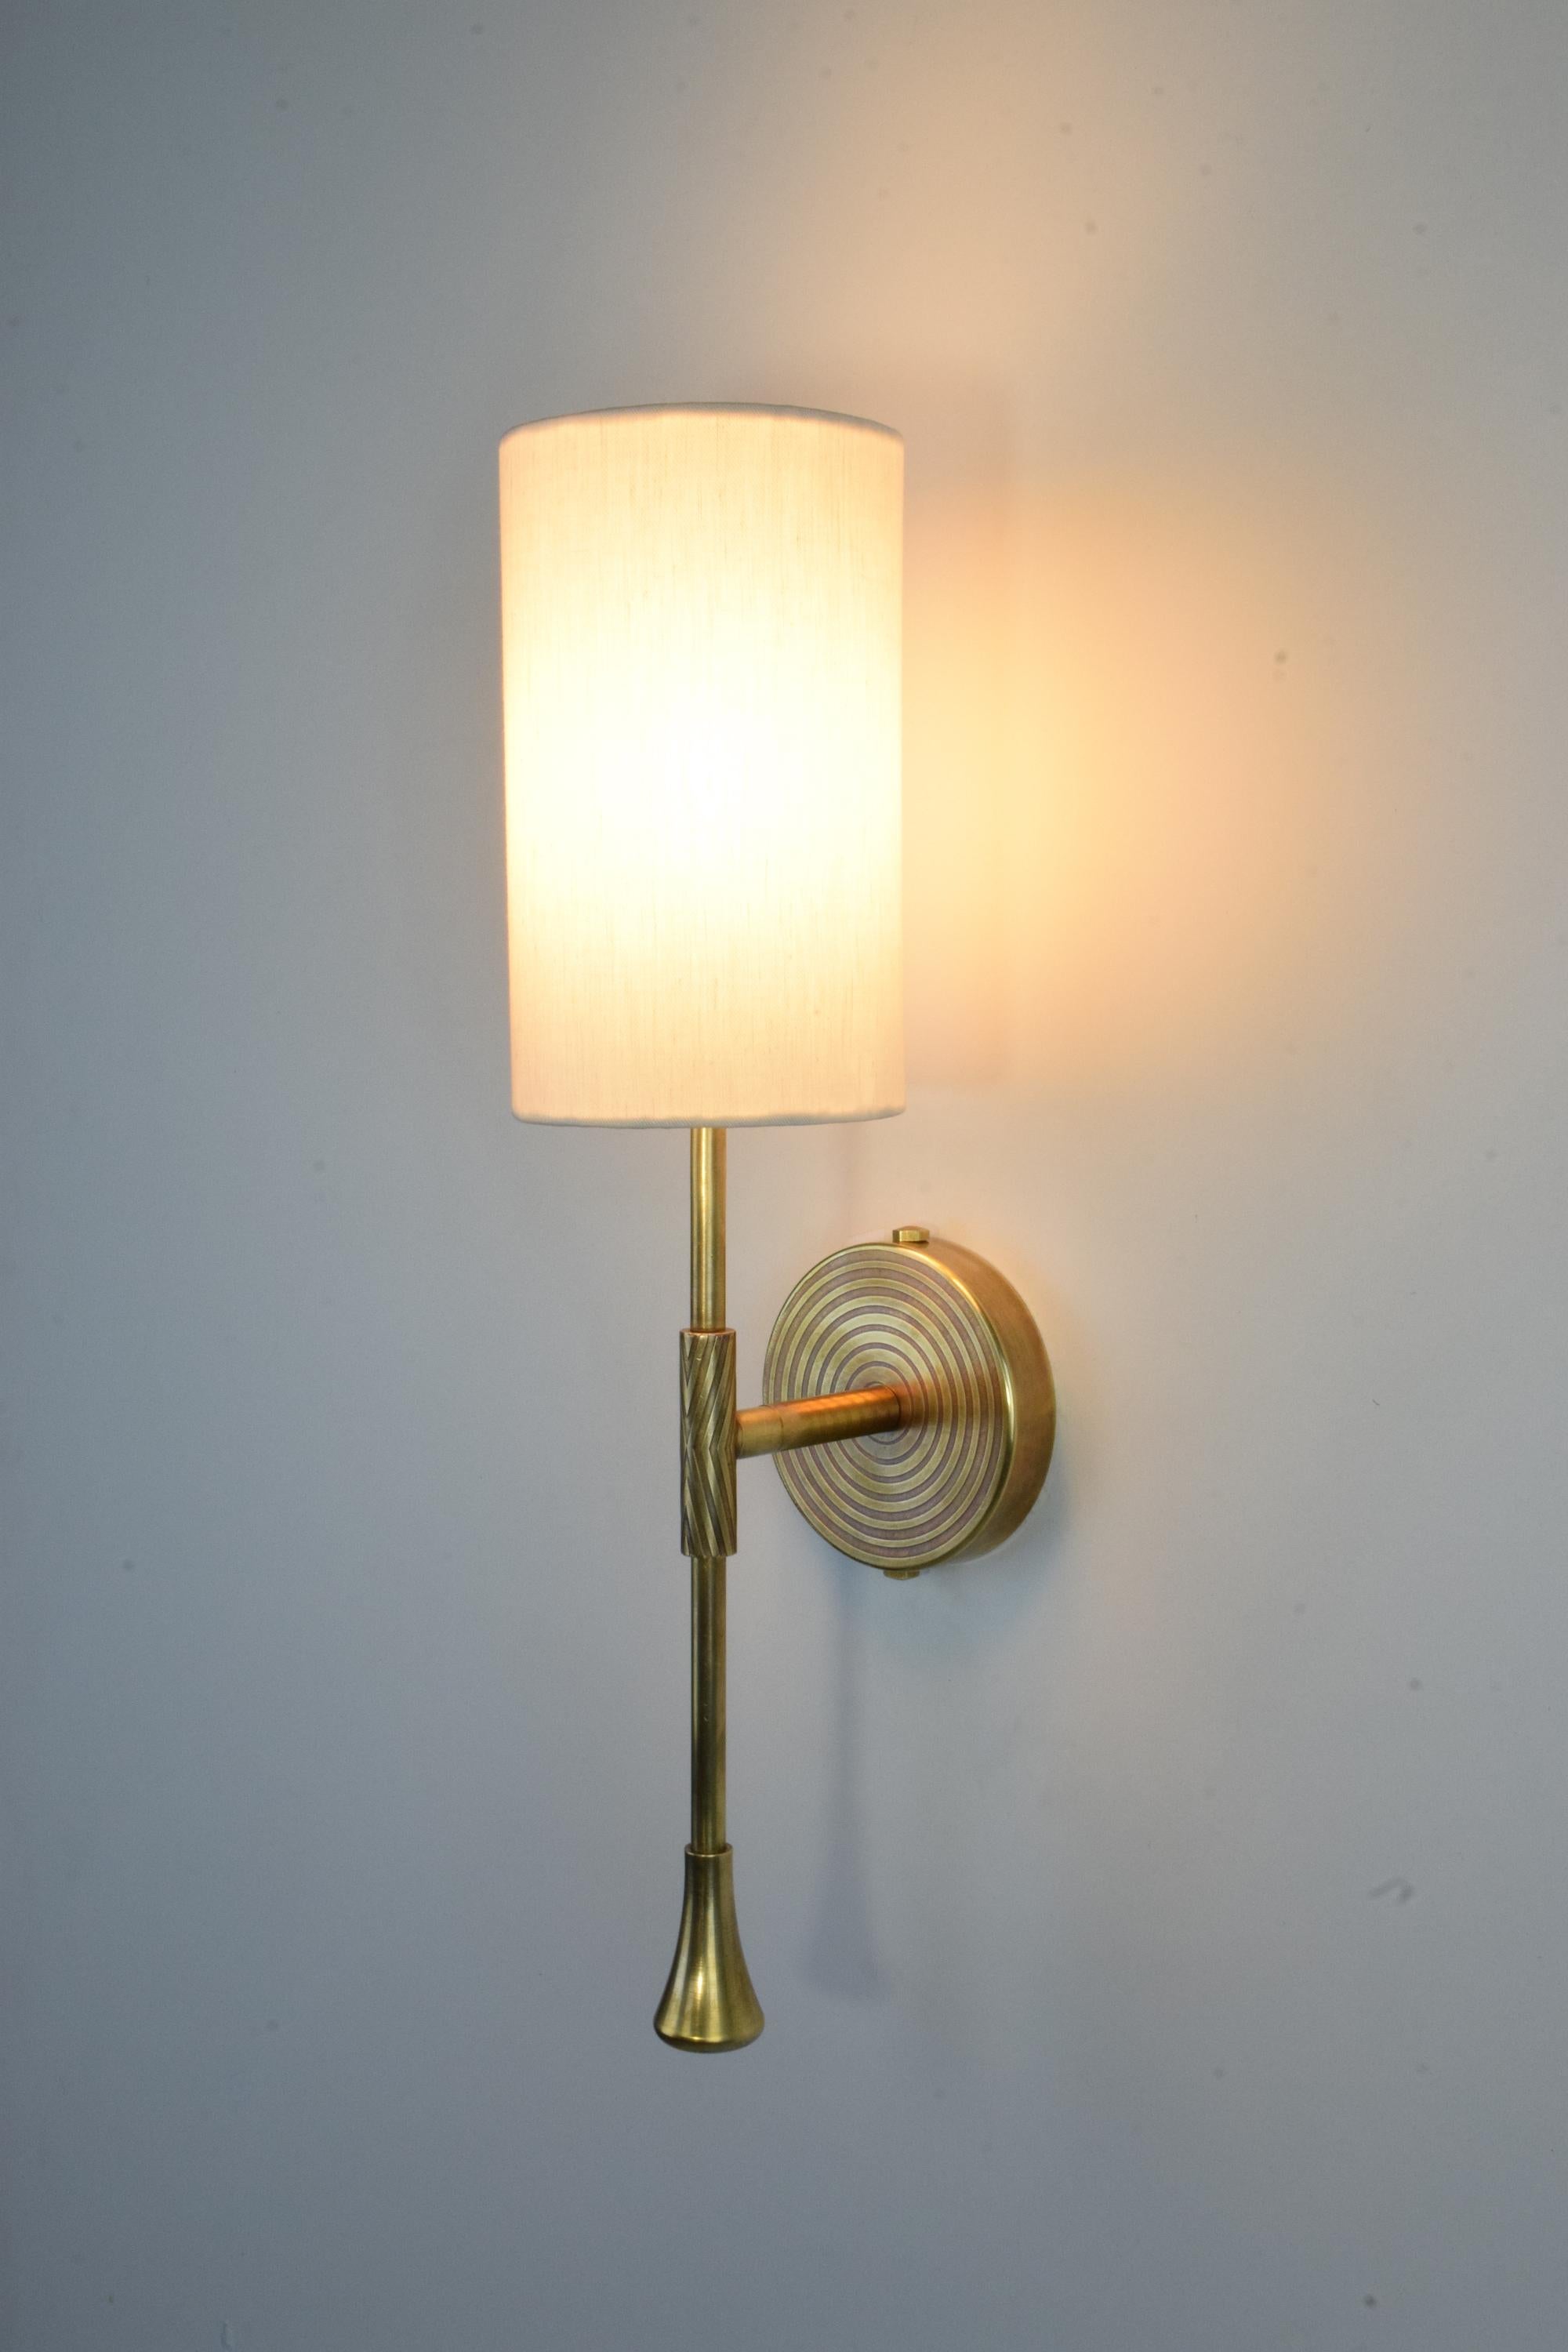 Daya is a timeless wall light built in a solid brass structure with a cylinder white fabric shade and modern hand- engravings on the wallplate and stem.
The engravings are optionable. 

Light source
1x60 W Max E14
230 V - LED Integrated 120 V -